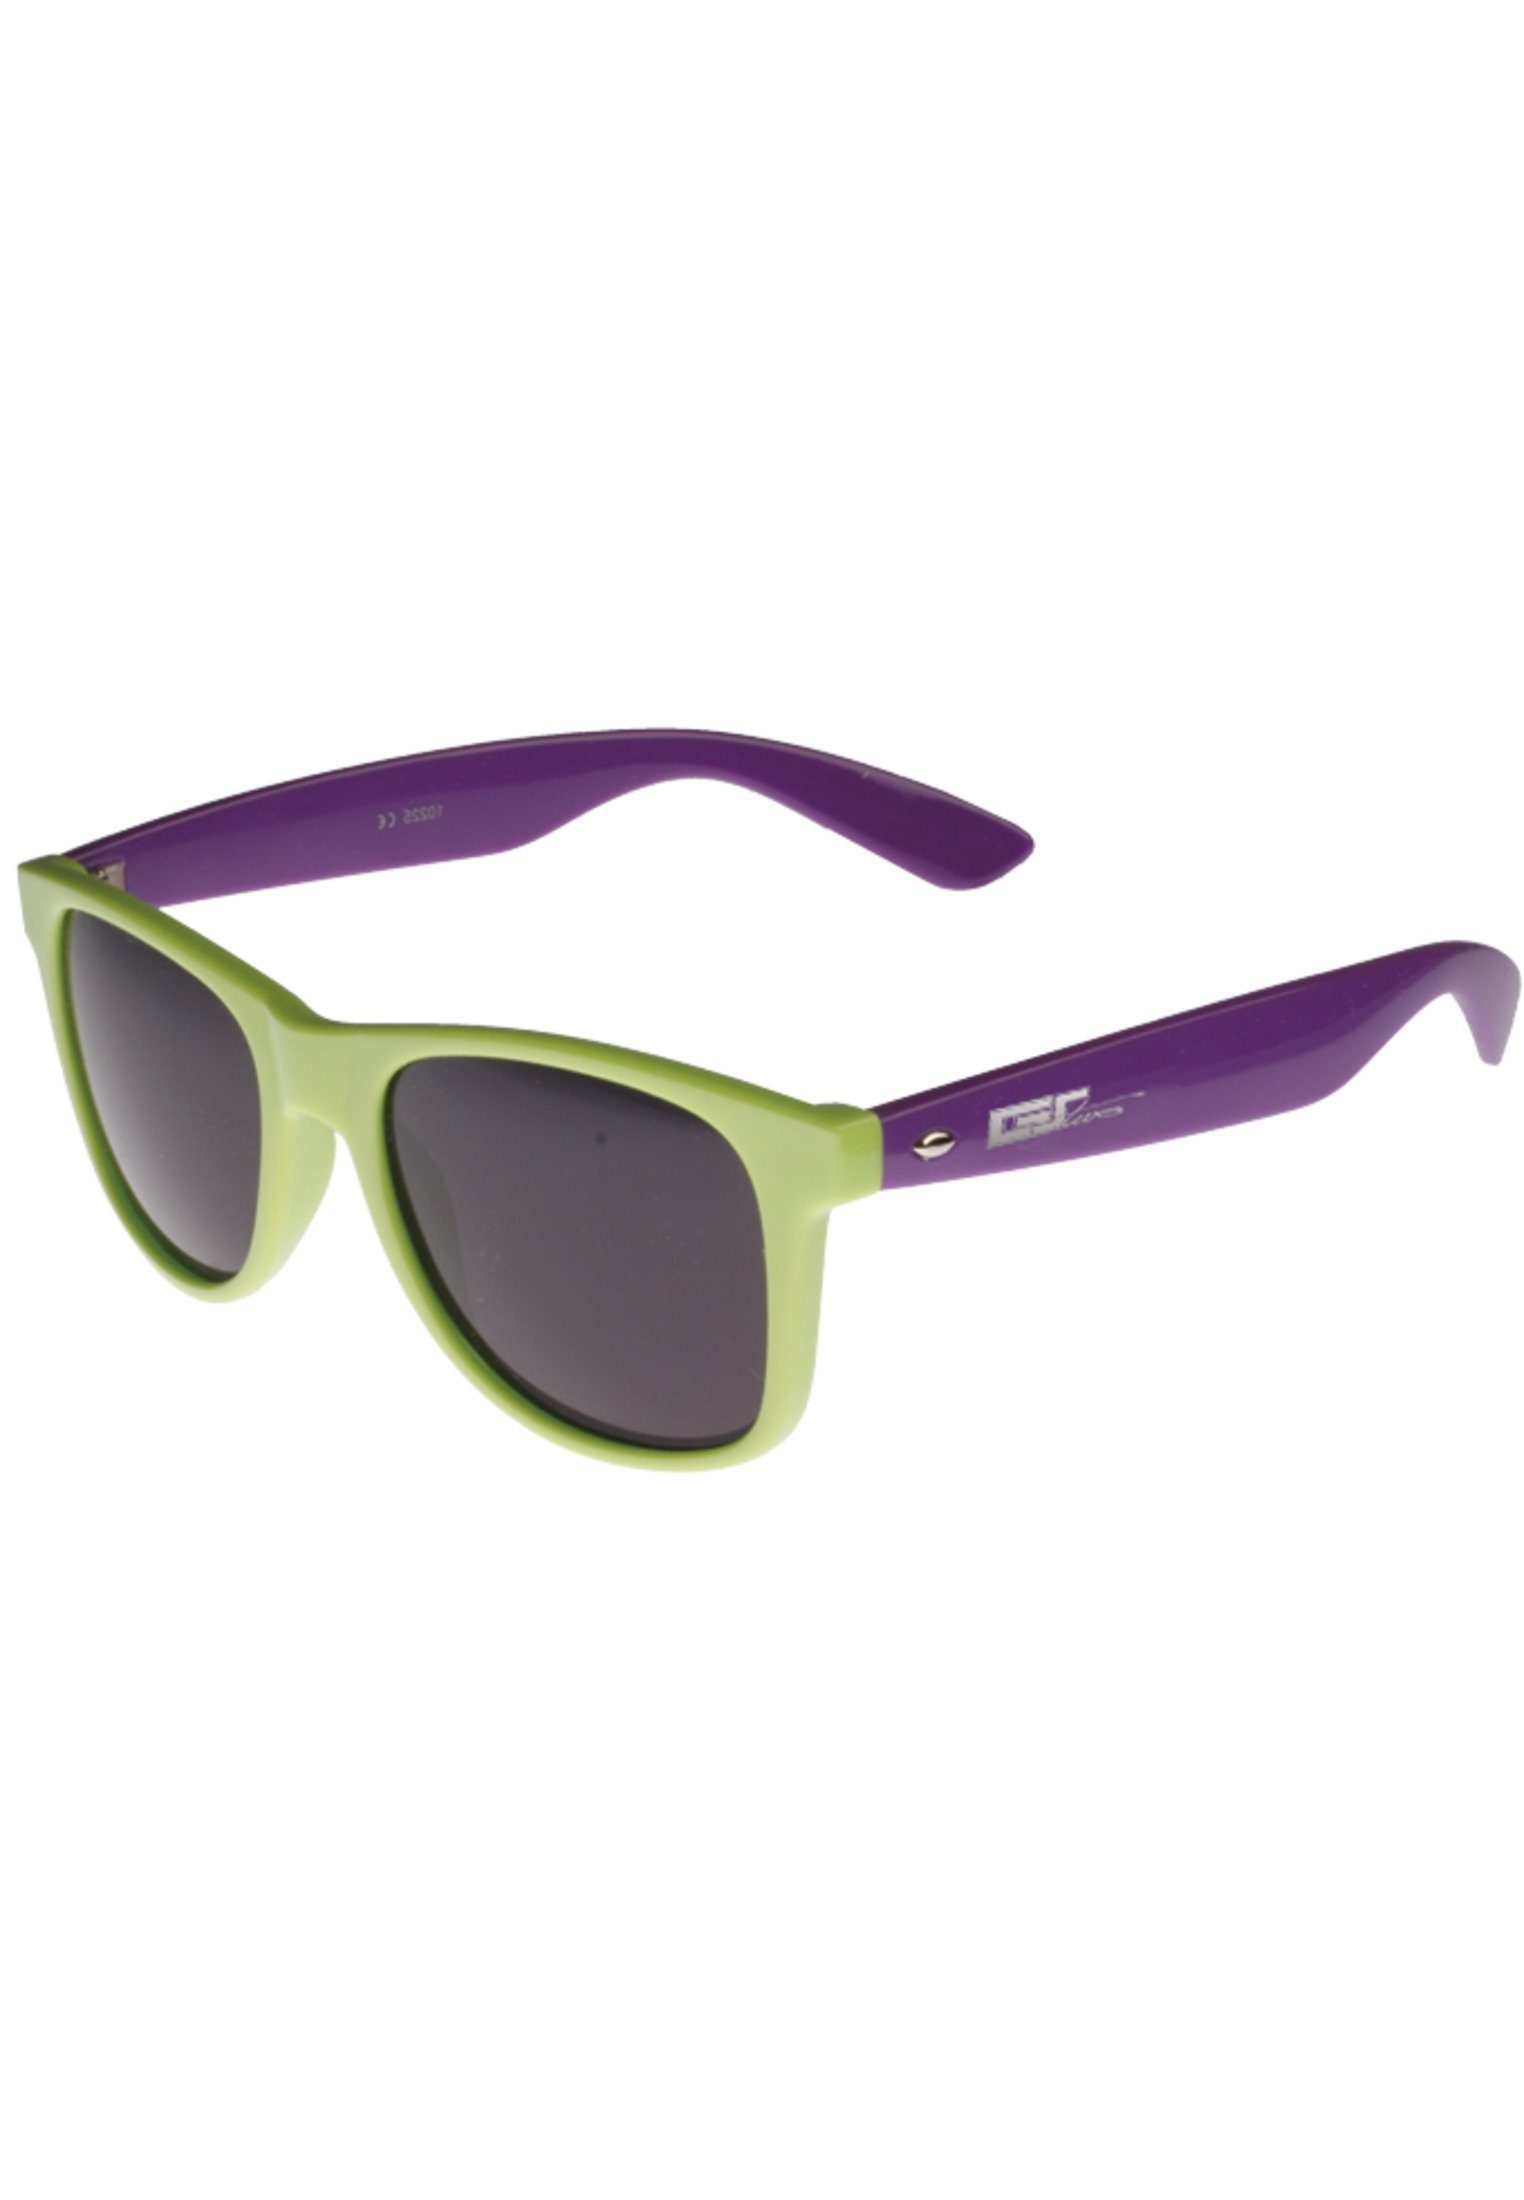 MSTRDS Sonnenbrille Accessoires Groove Shades GStwo limegreen/purple